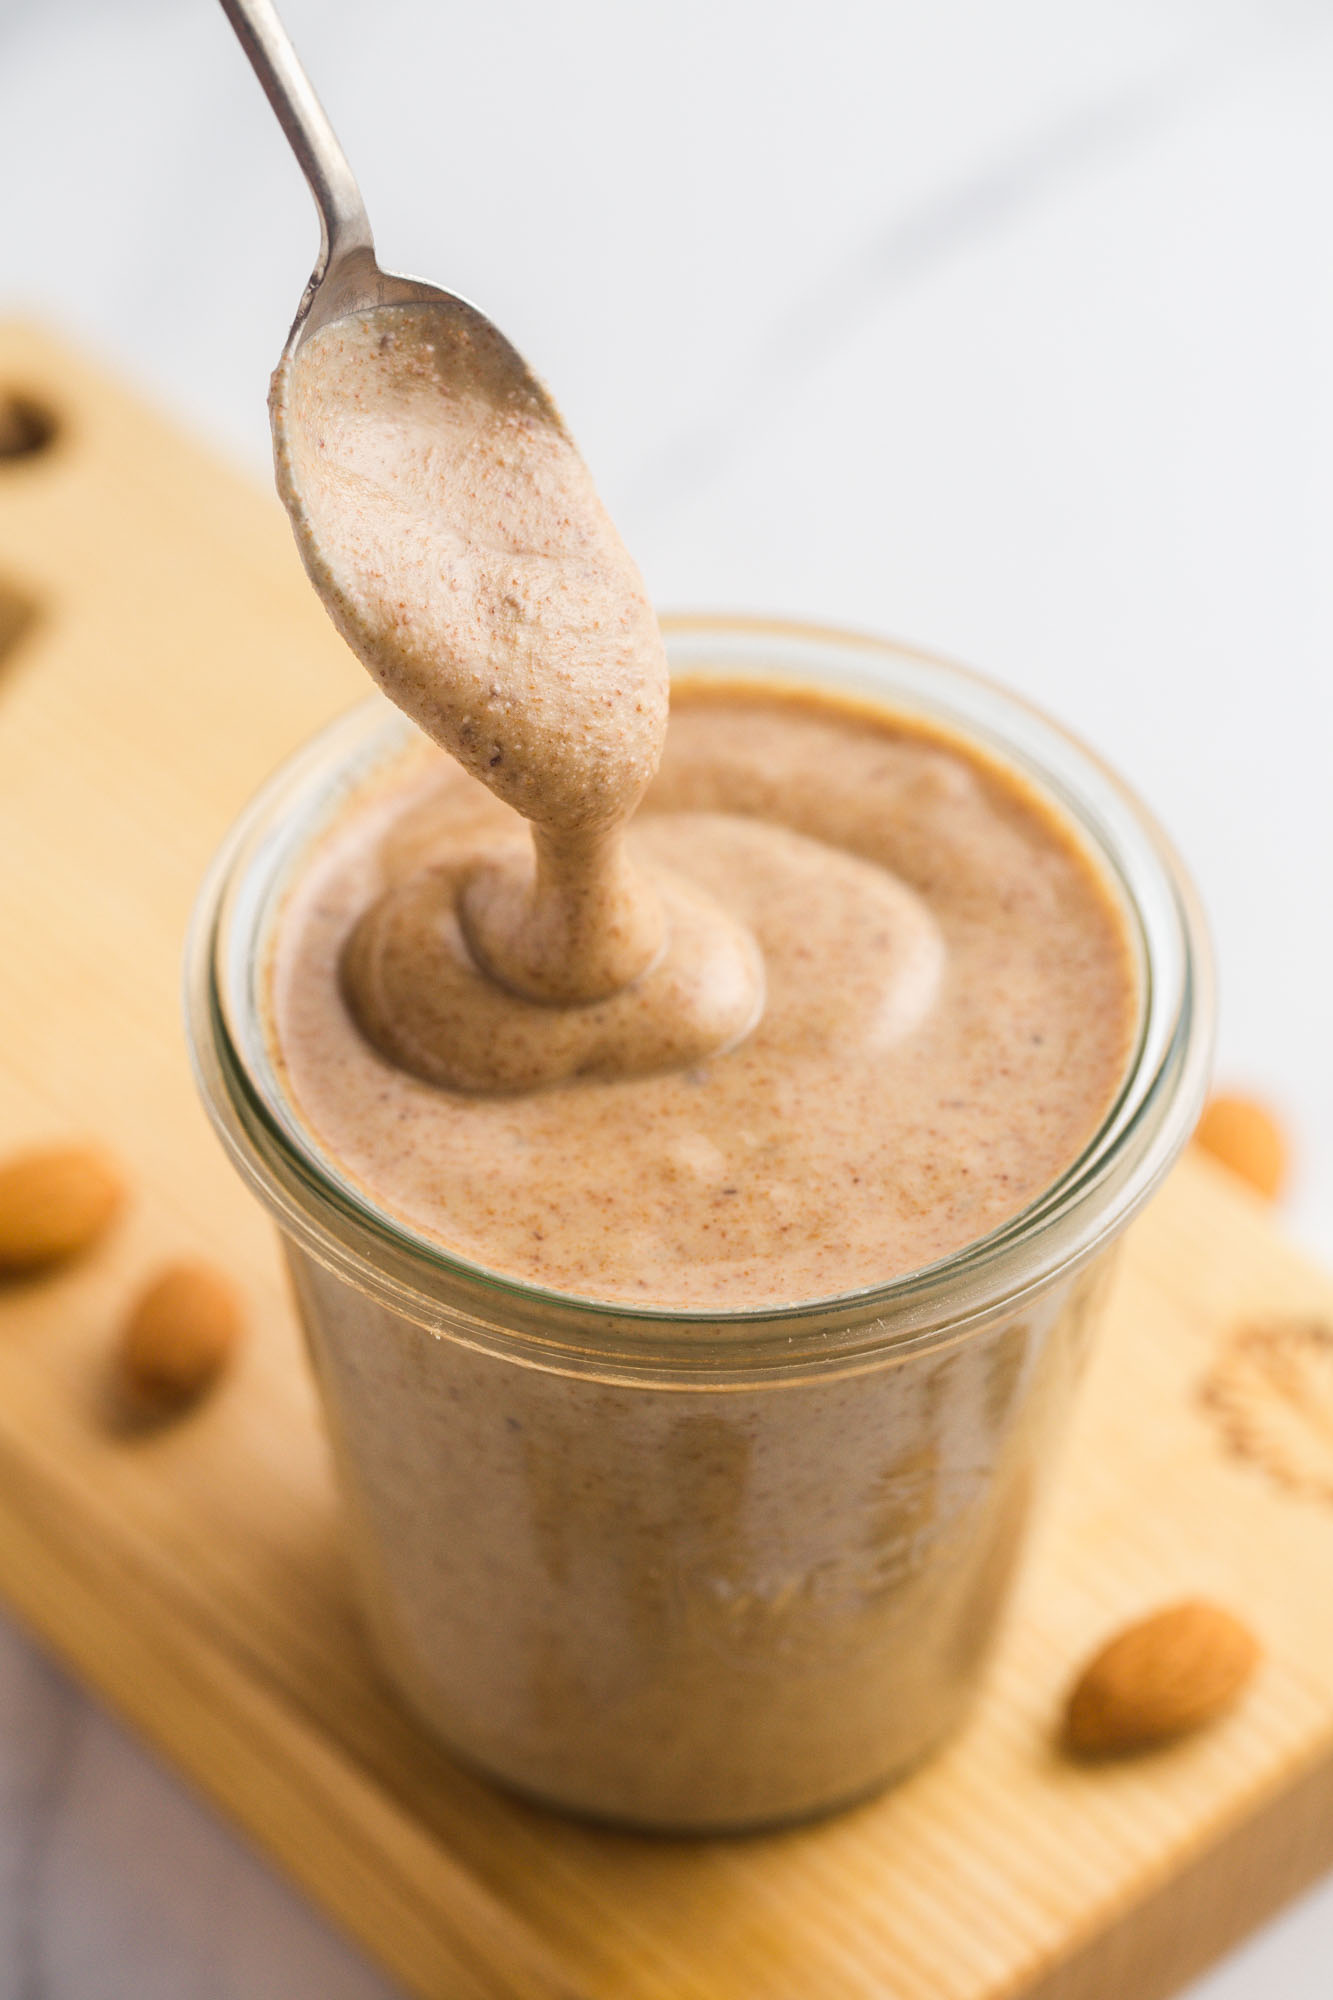 Runny (fresh) almond butter in a glass Weck jar and a spoon